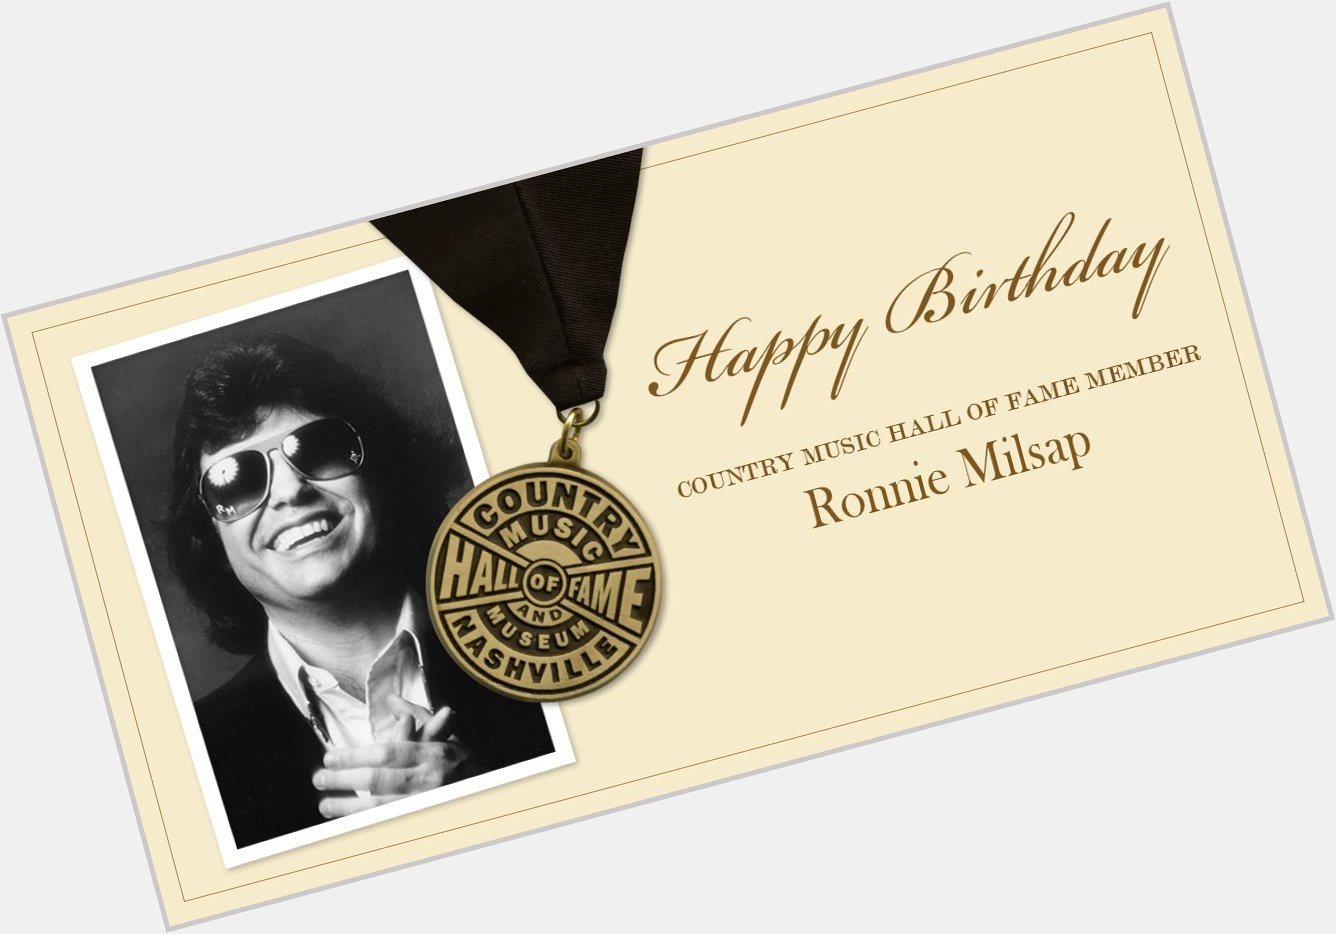 Happy birthday to Country Music Hall of Fame member, Ronnie Milsap! 